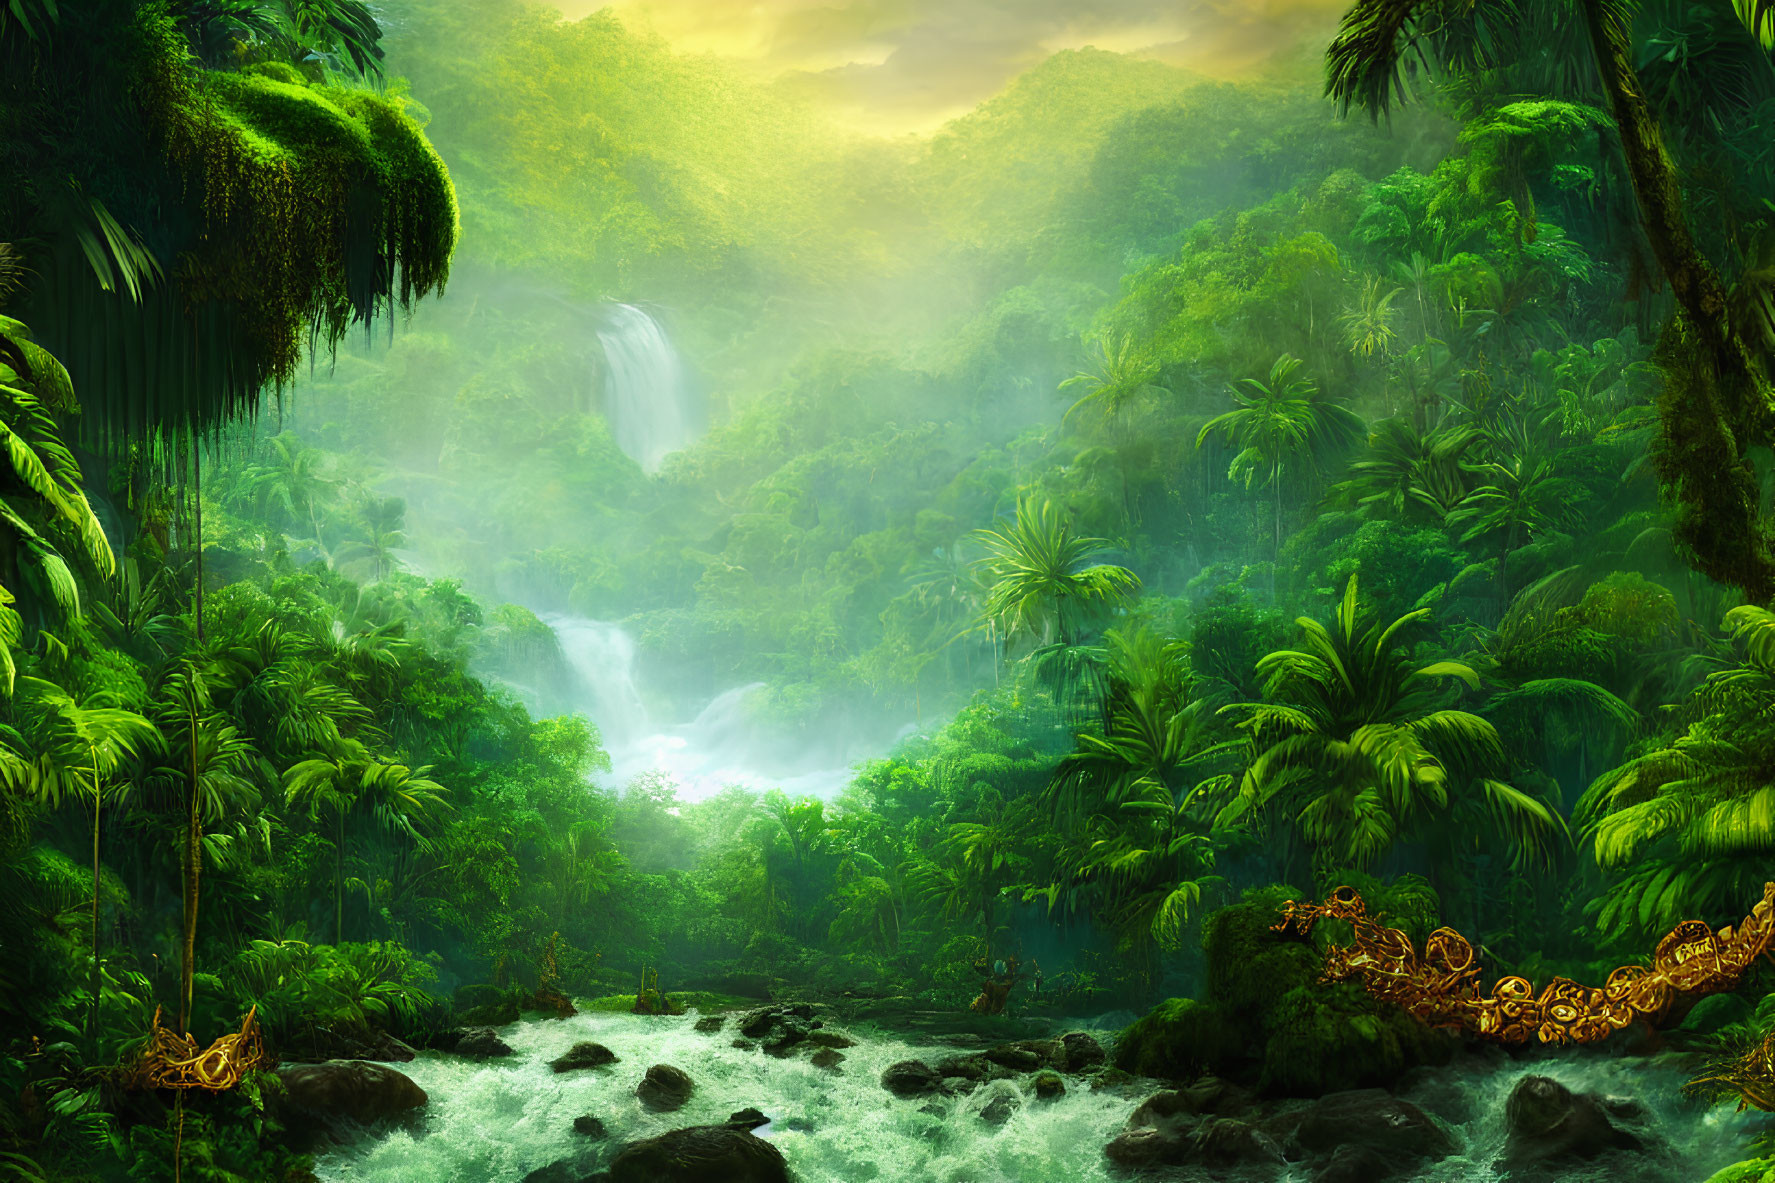 Tropical Jungle with Waterfalls, River, and Sunlit Foliage